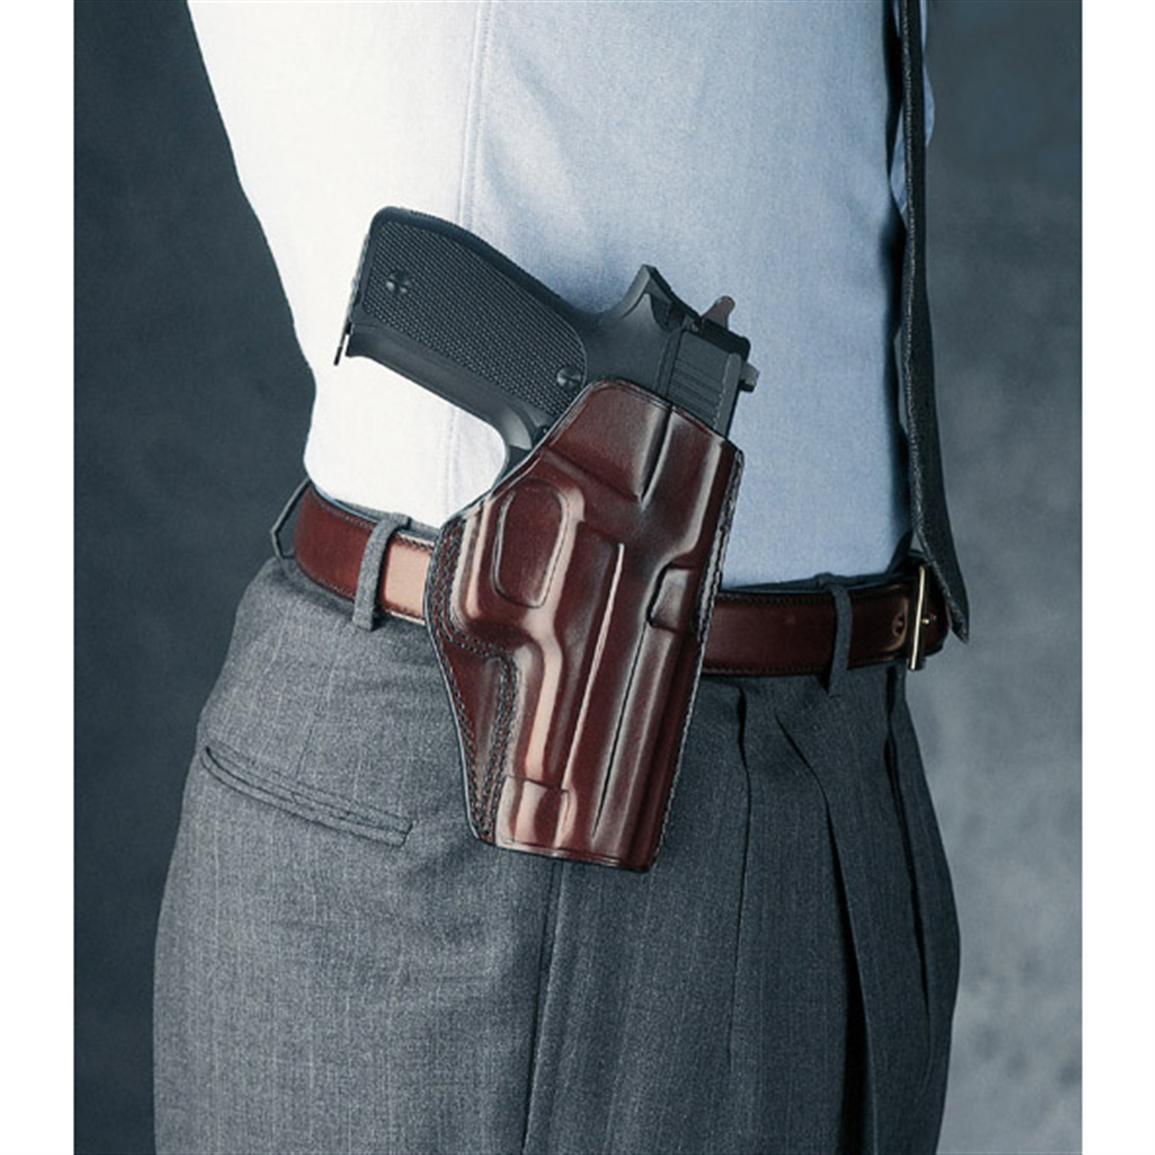 holsters for concealed carry